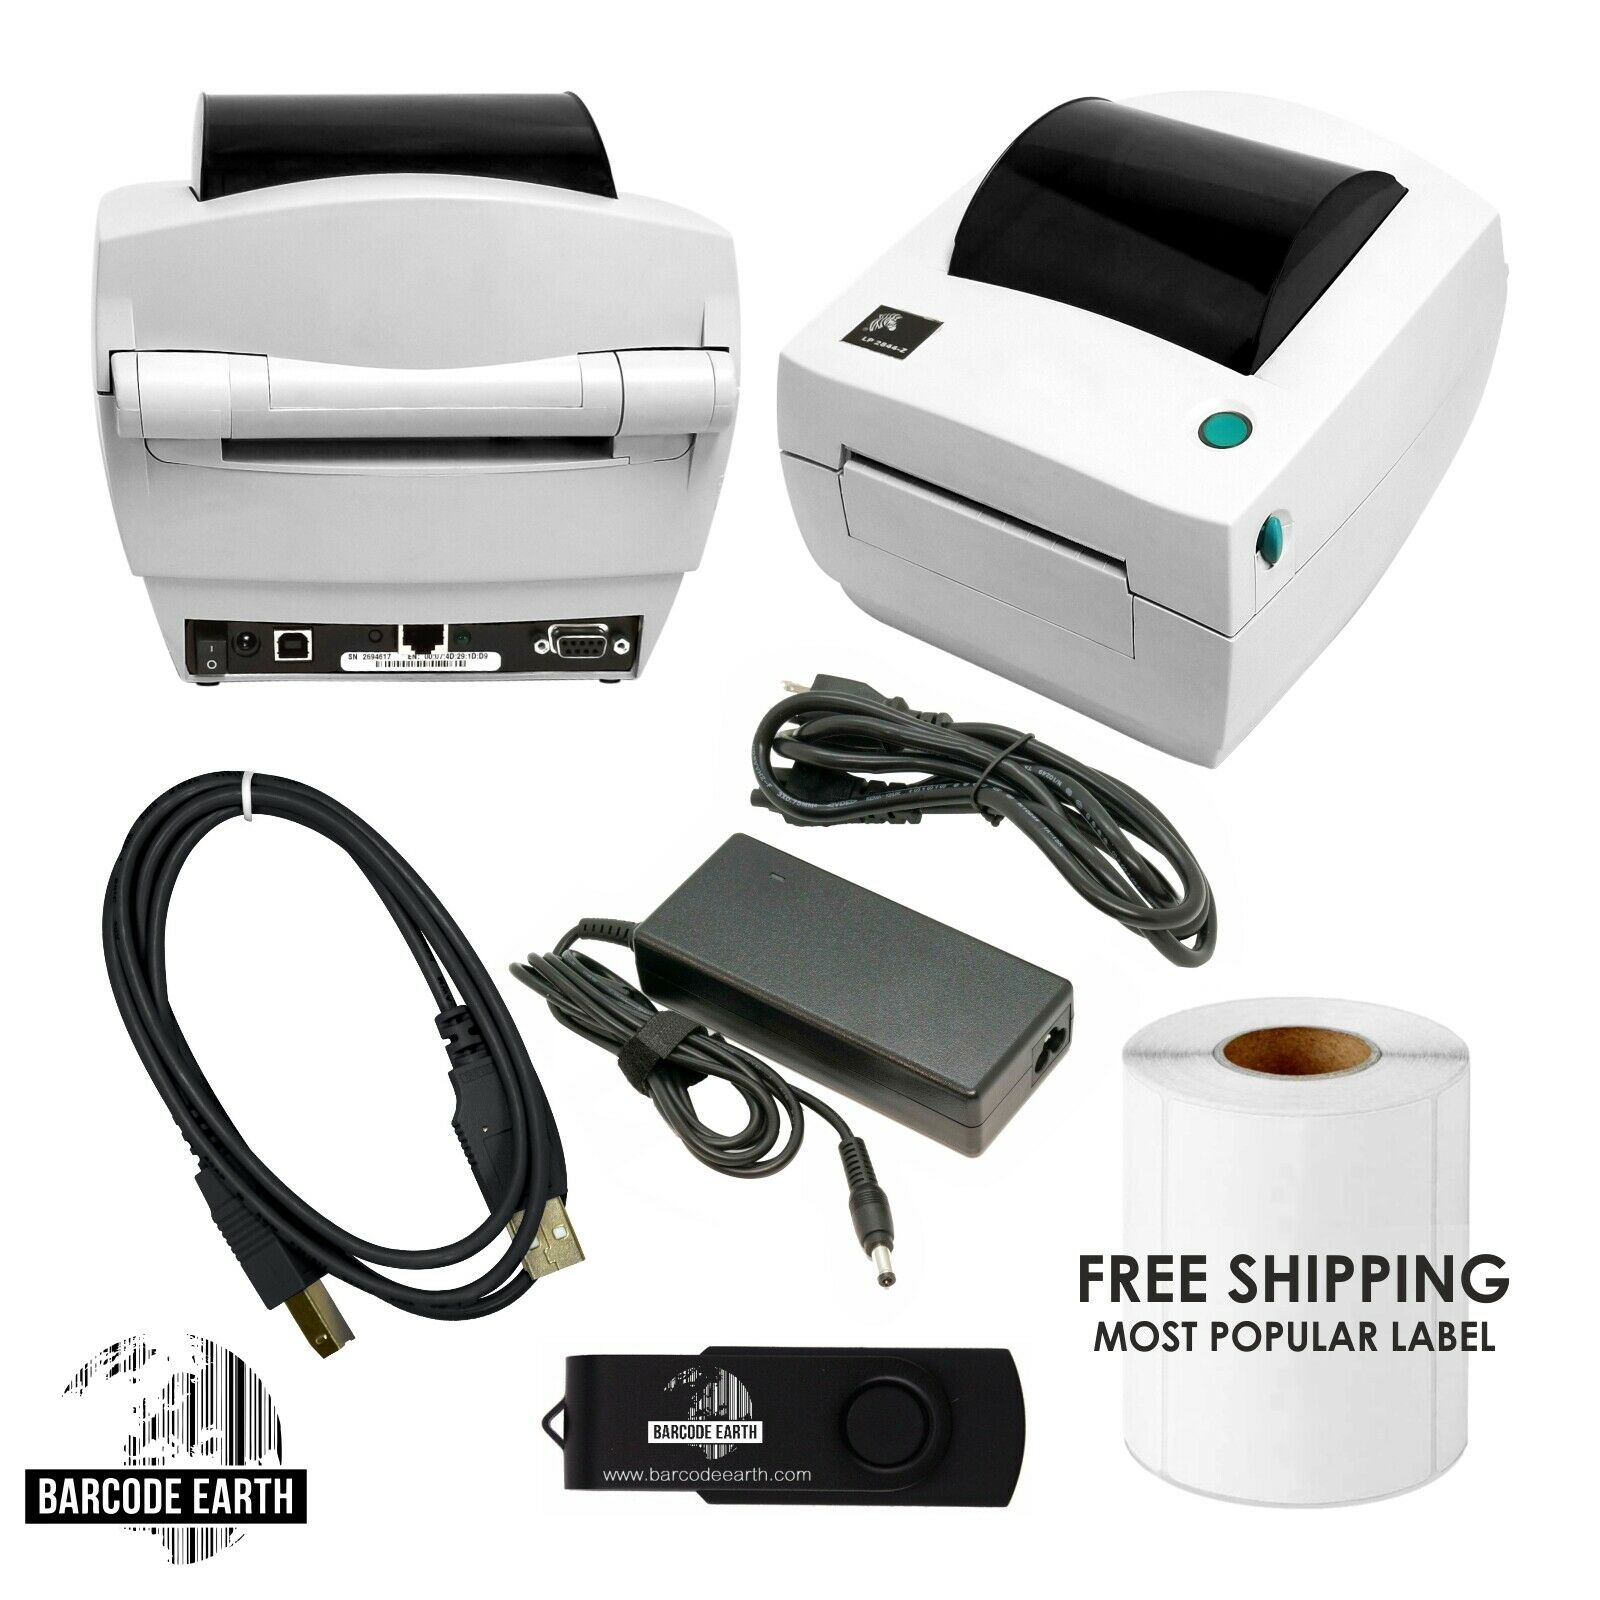 LP2844-Z Direct Thermal Printer - Network / Ethernet, Power, USB Barcodeearth